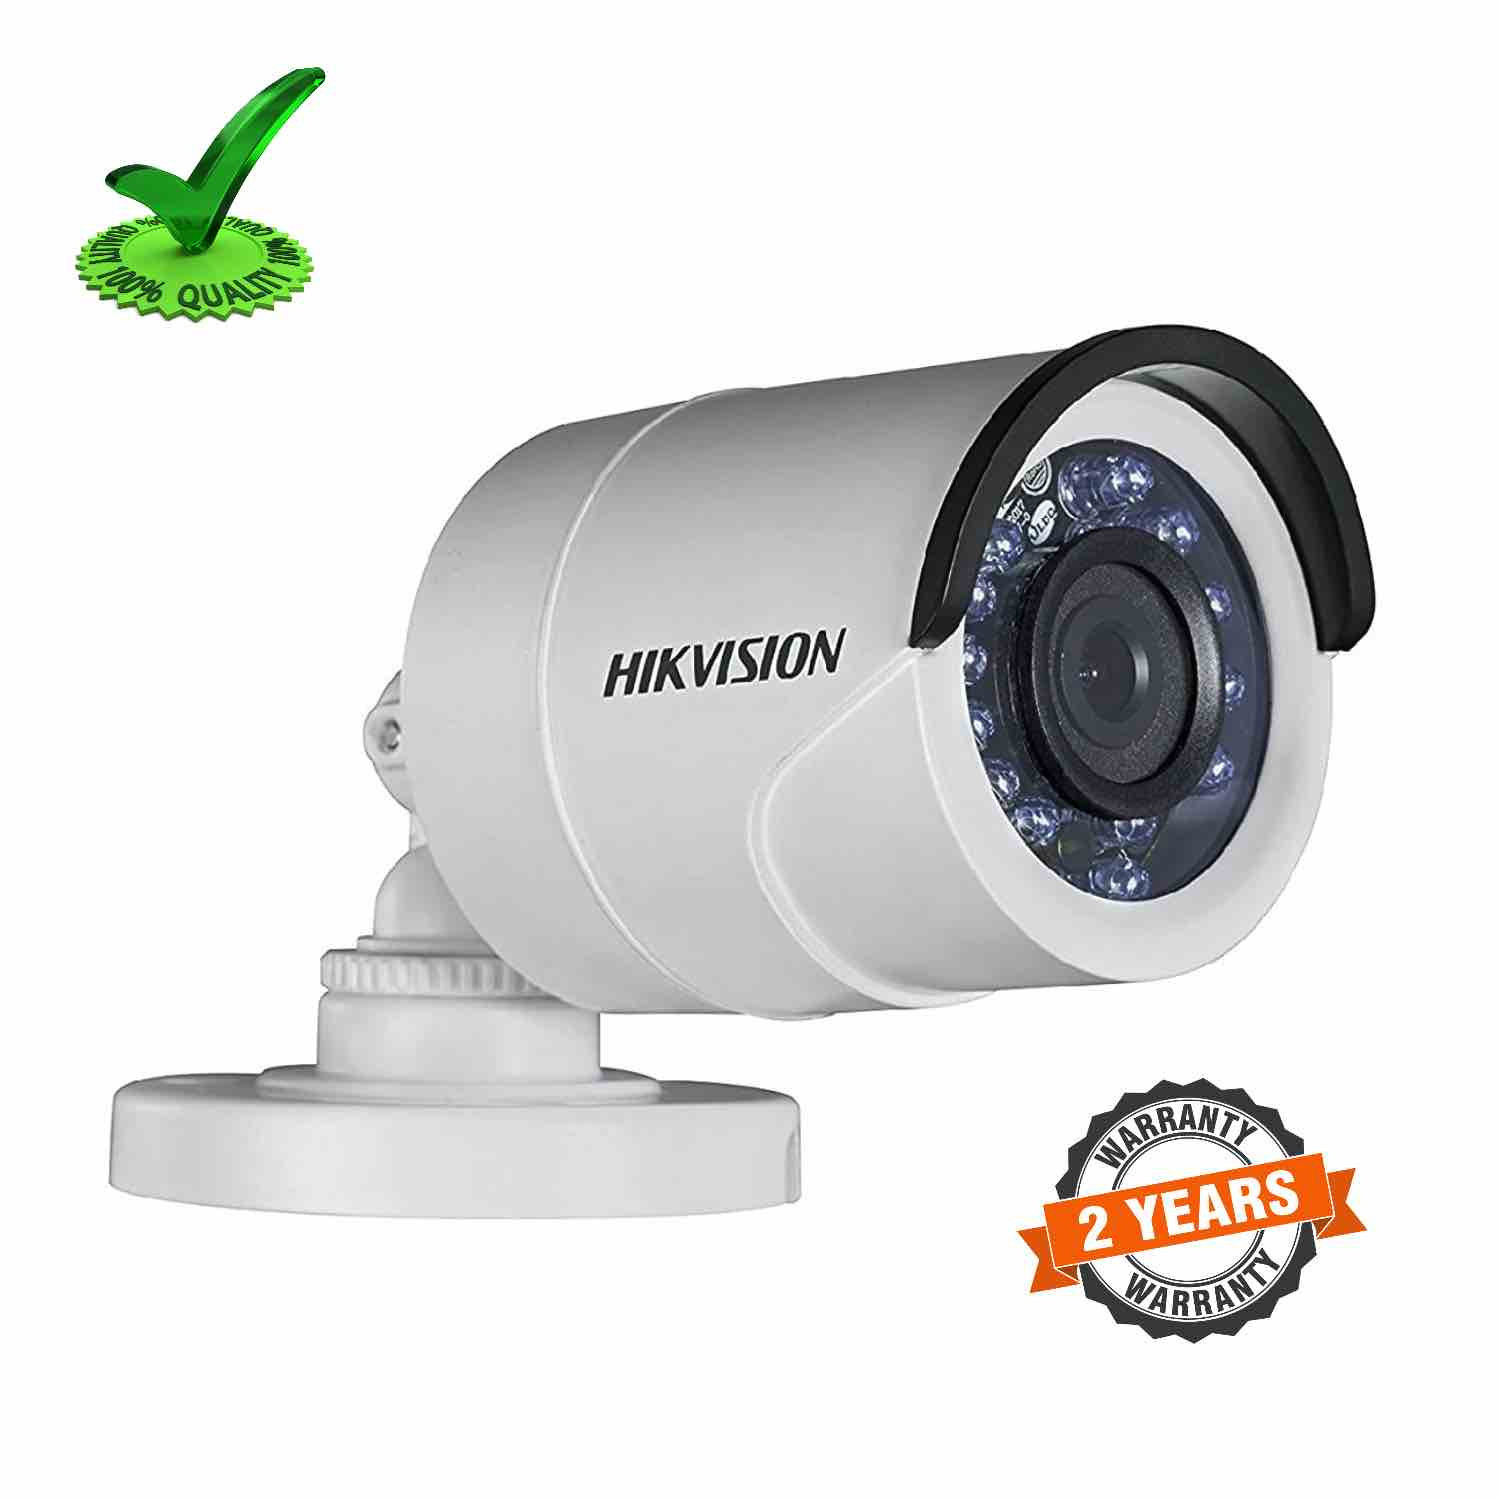  Hikvision DS-2CE1AD0T-IRPF 2mp HD 1080p IR Bullet Camera